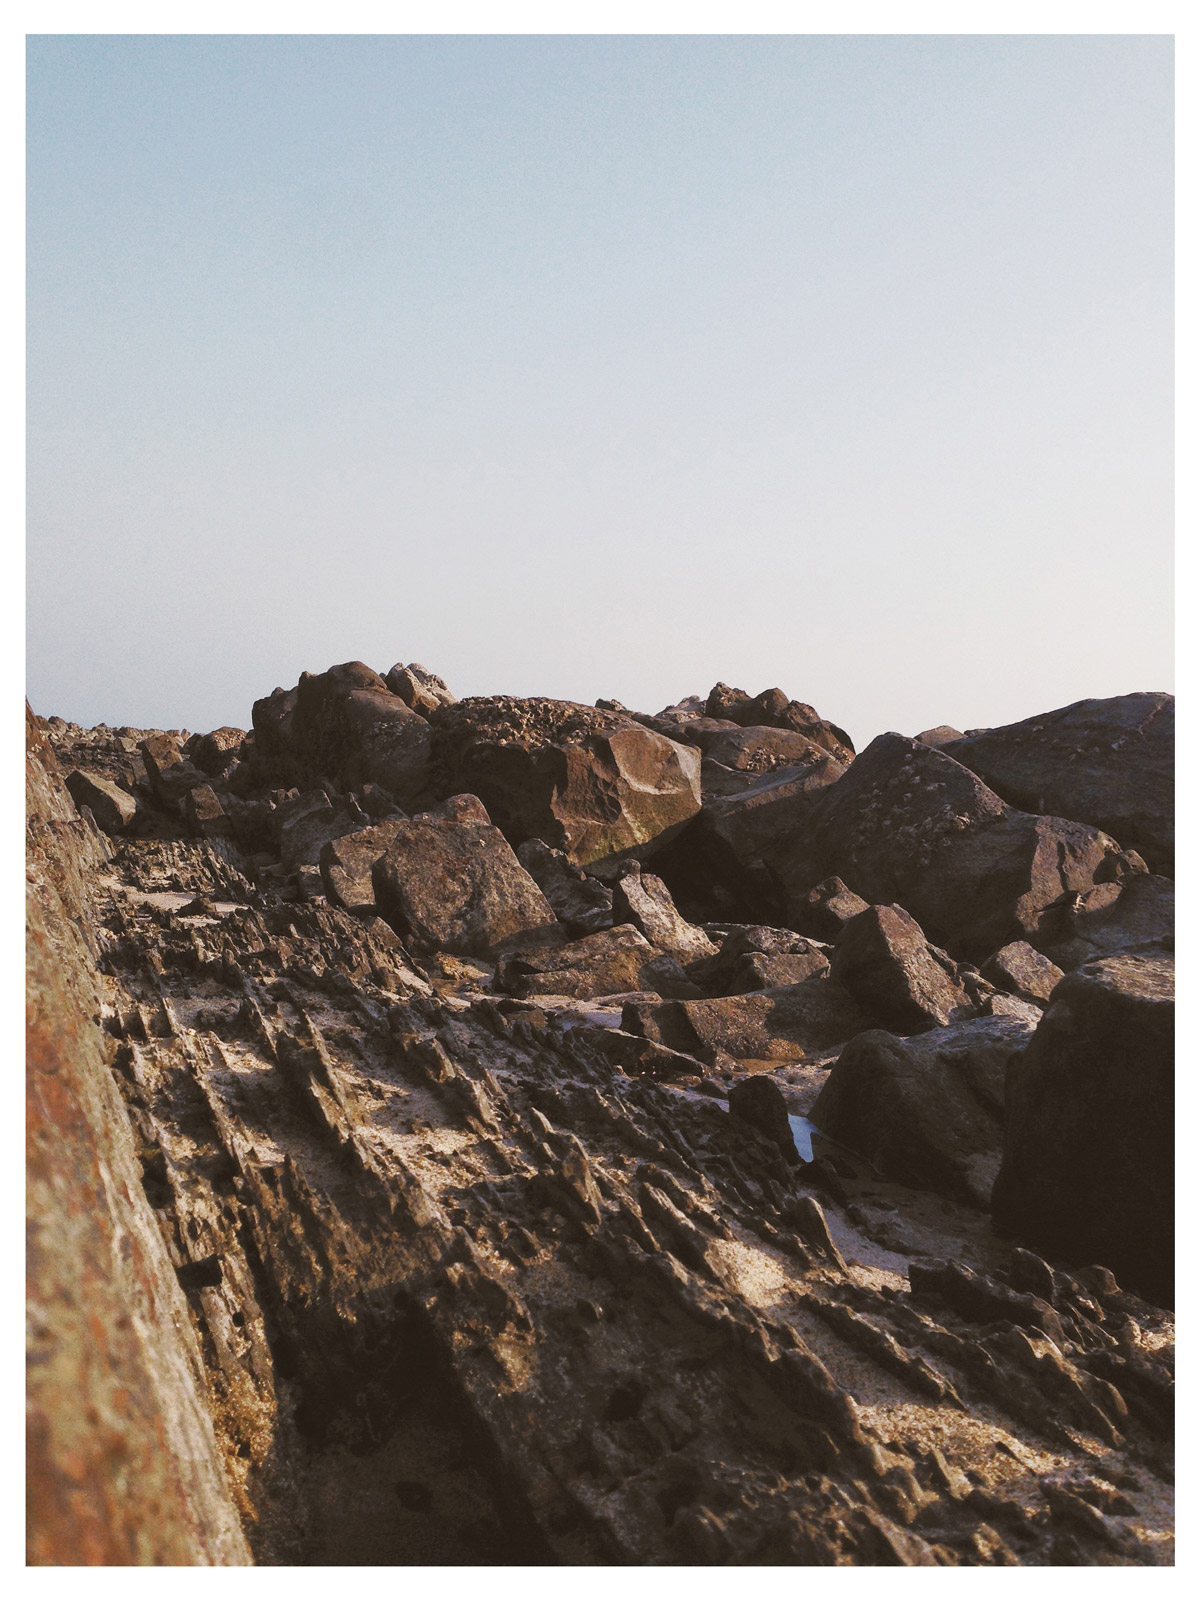 Nature beach myanmar ngapali ngwesaung vsco vscocam abstract iphone iPhoneography iphone only free wallpaper retina retina-ready